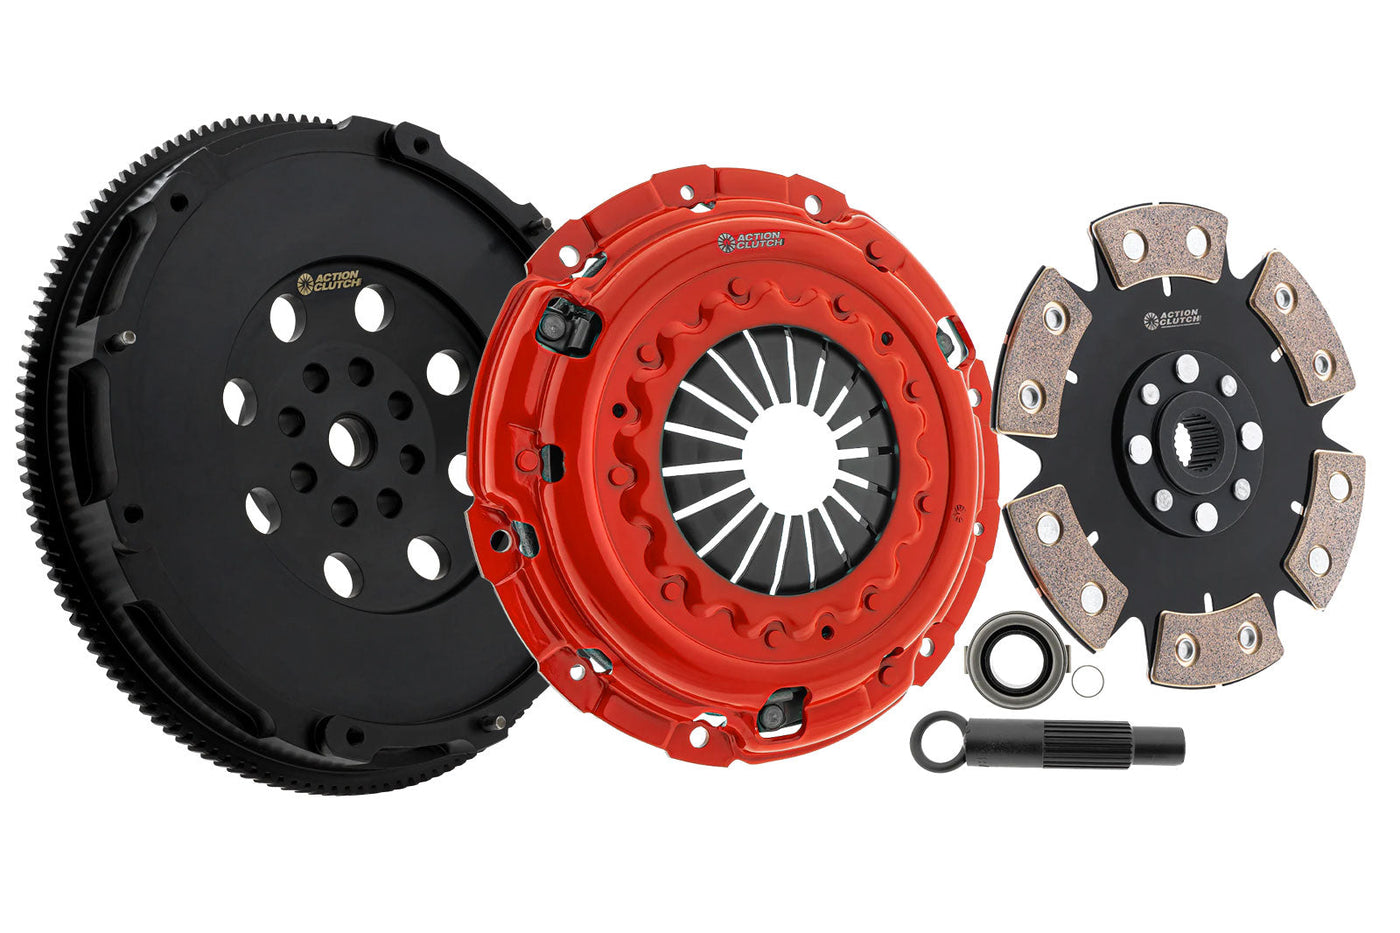 Stage 4 Clutch Kit (1MD) for Honda Civic SI 2022 1.5L (L15B7) Turbo Includes Chromoly Lightweight Flywheel